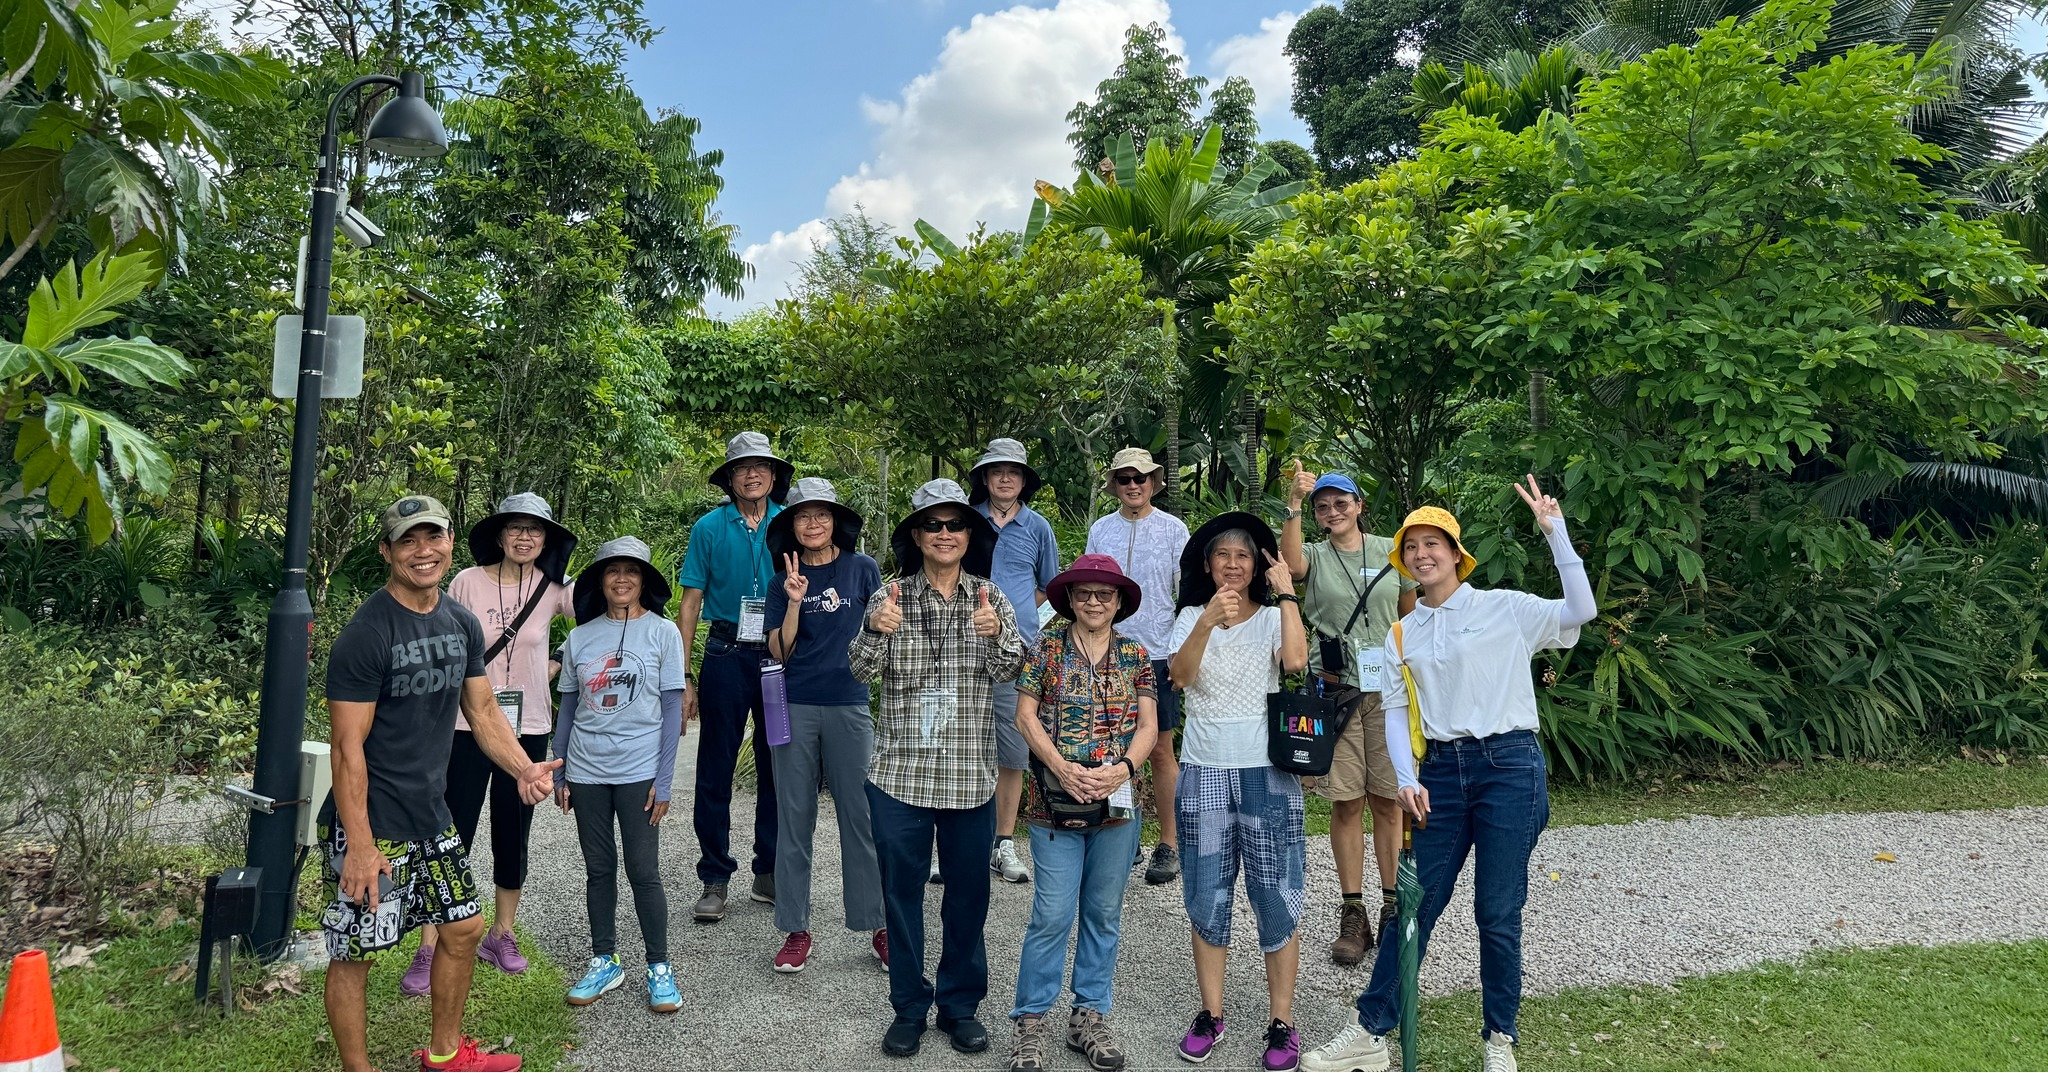 We have officially commenced the intervention phase of our research program in collaboration with NUS! It is always a delight to see that our participants are enthusiastic about learning and discovering, even in the midst of the hot weather. 🥵🌞🤗

